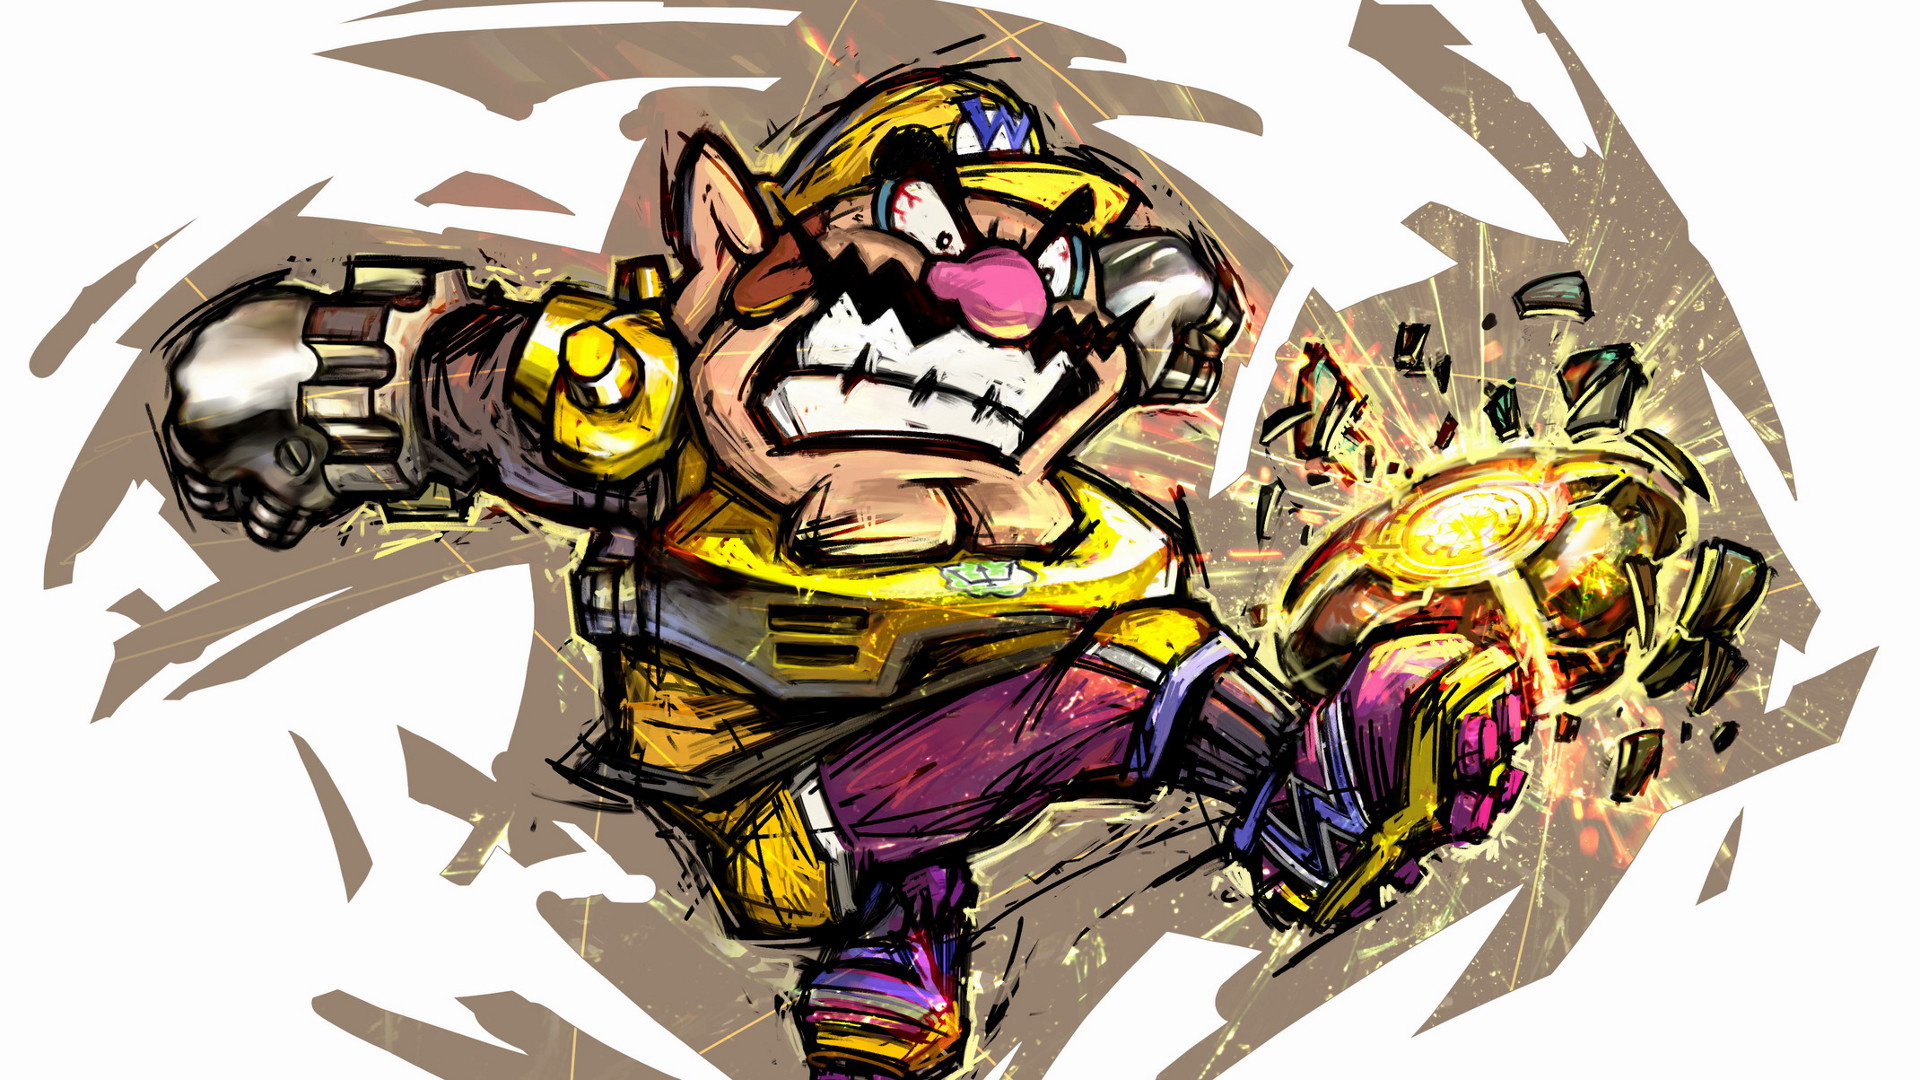 Video Game Mario Strikers Charged 1920x1080